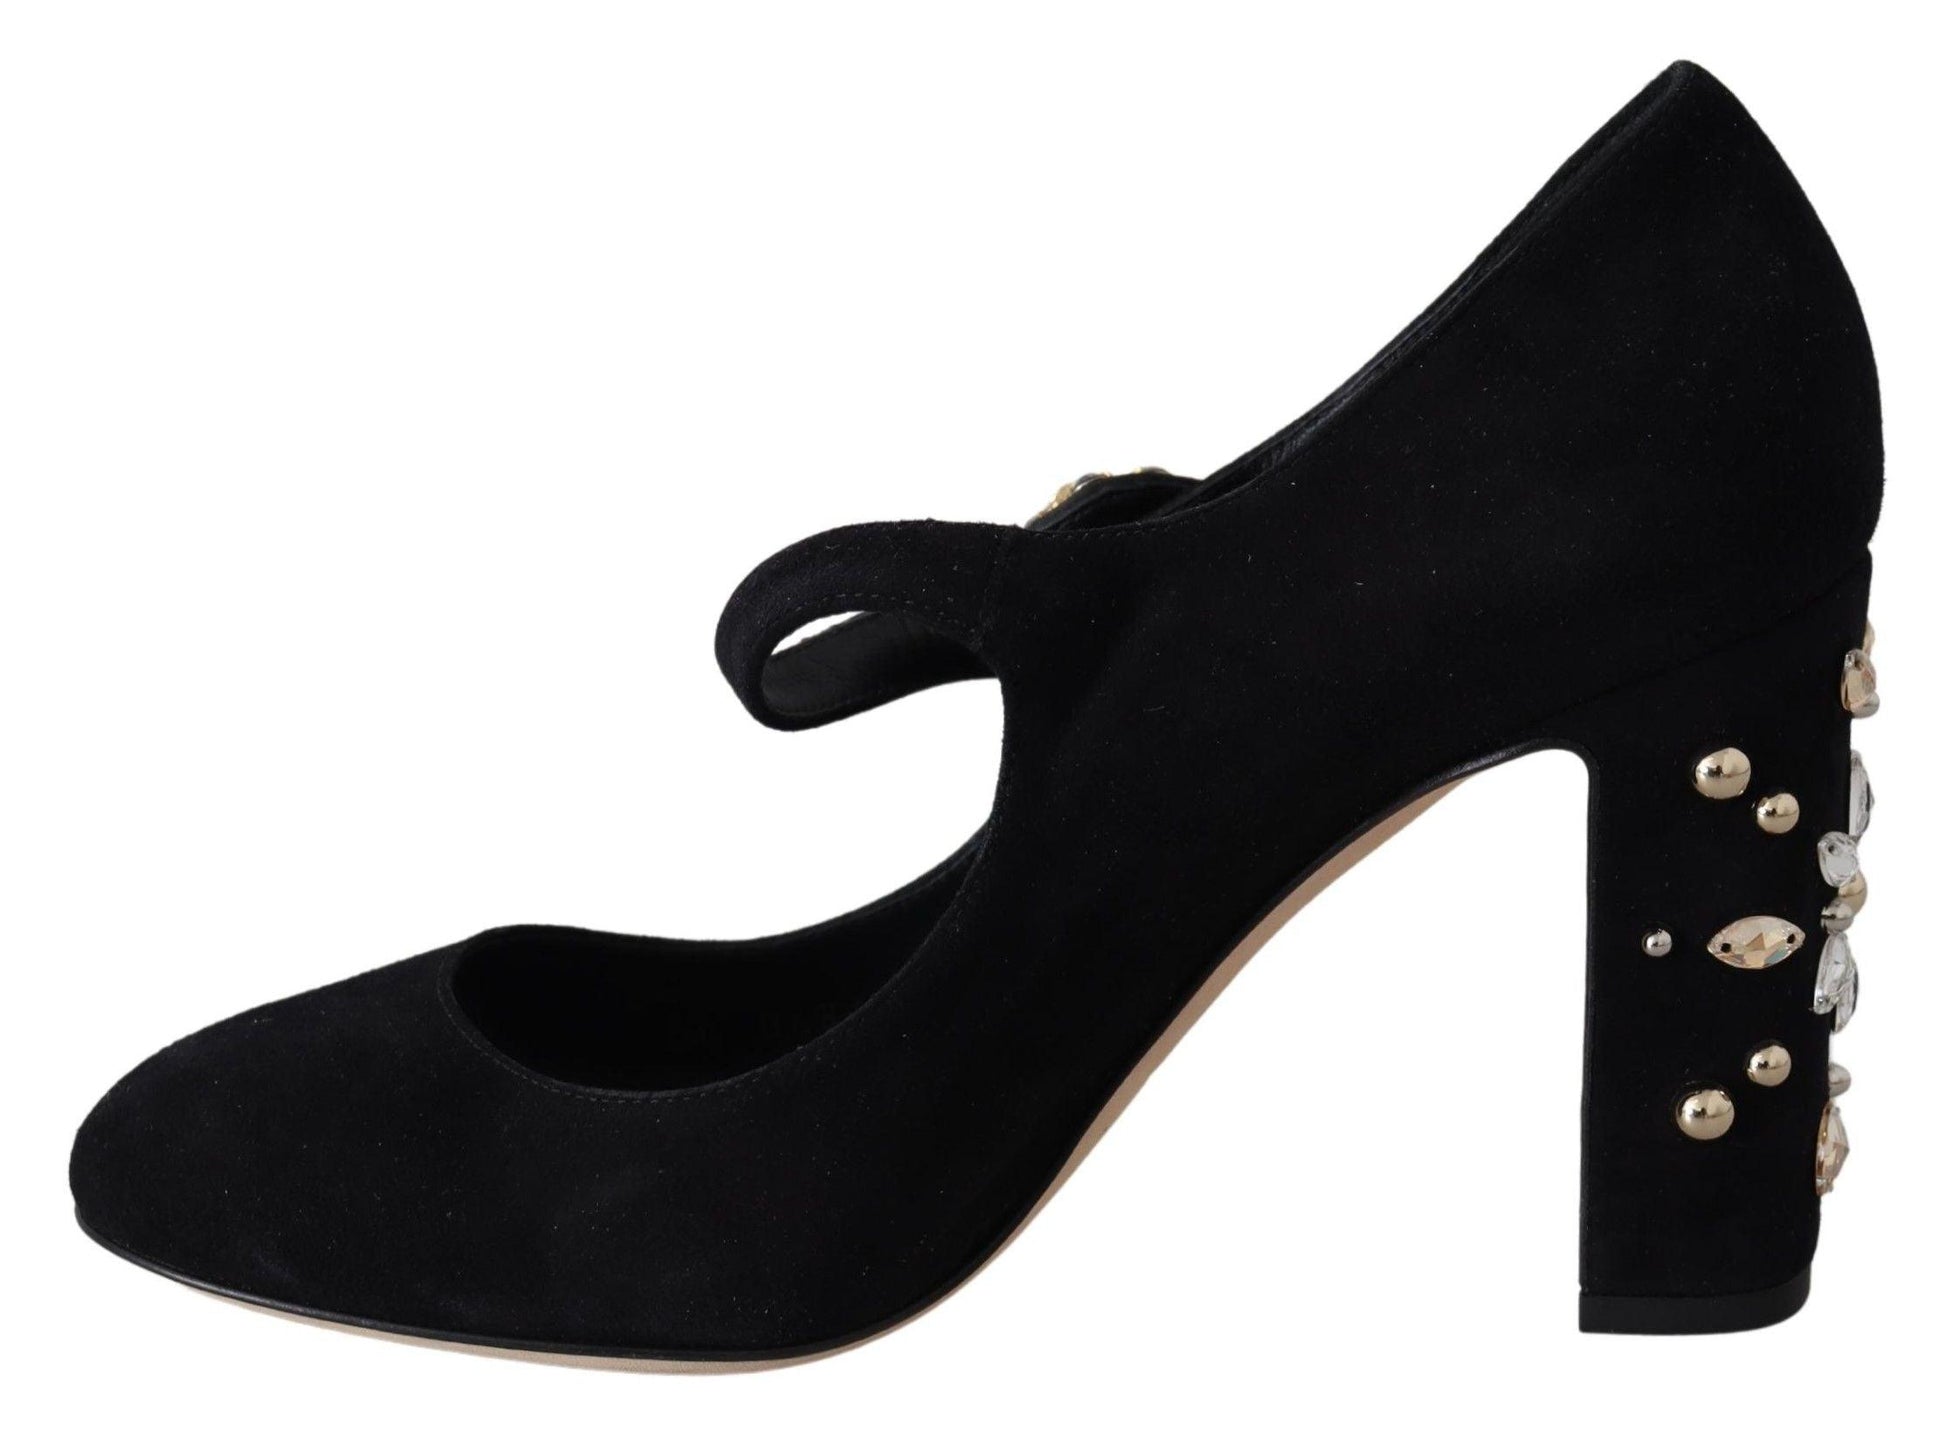 Dolce & Gabbana Black Suede Crystal Heels Mary Jane Shoes - Designed by Dolce & Gabbana Available to Buy at a Discounted Price on Moon Behind The Hill Online Designer Discount Store